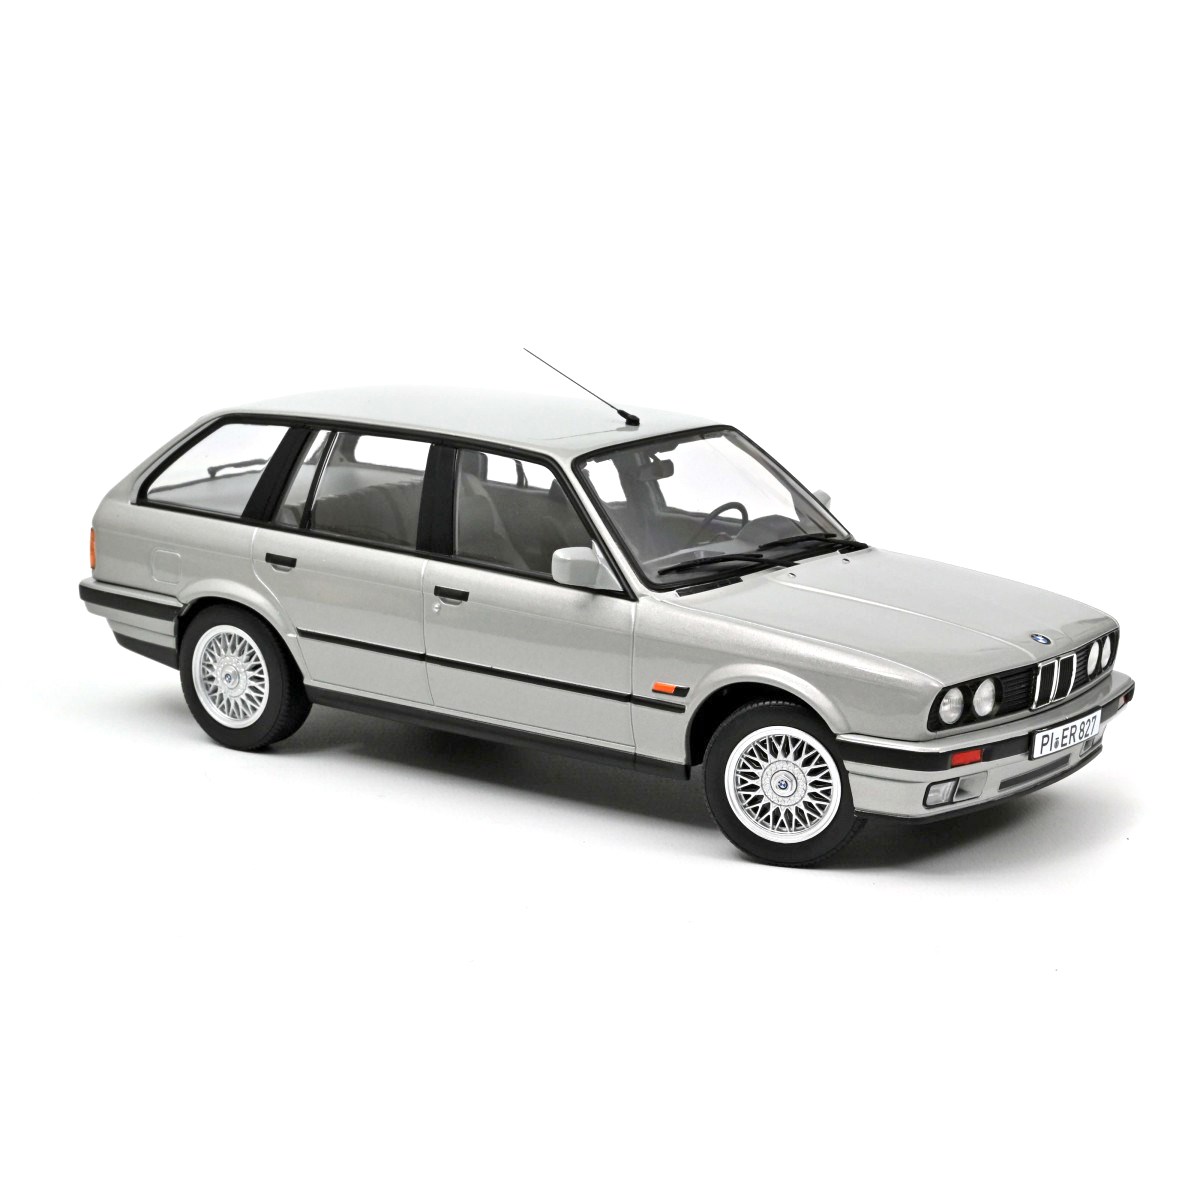 Norev Bmw 325I Touring 1991 - Silver 1:18